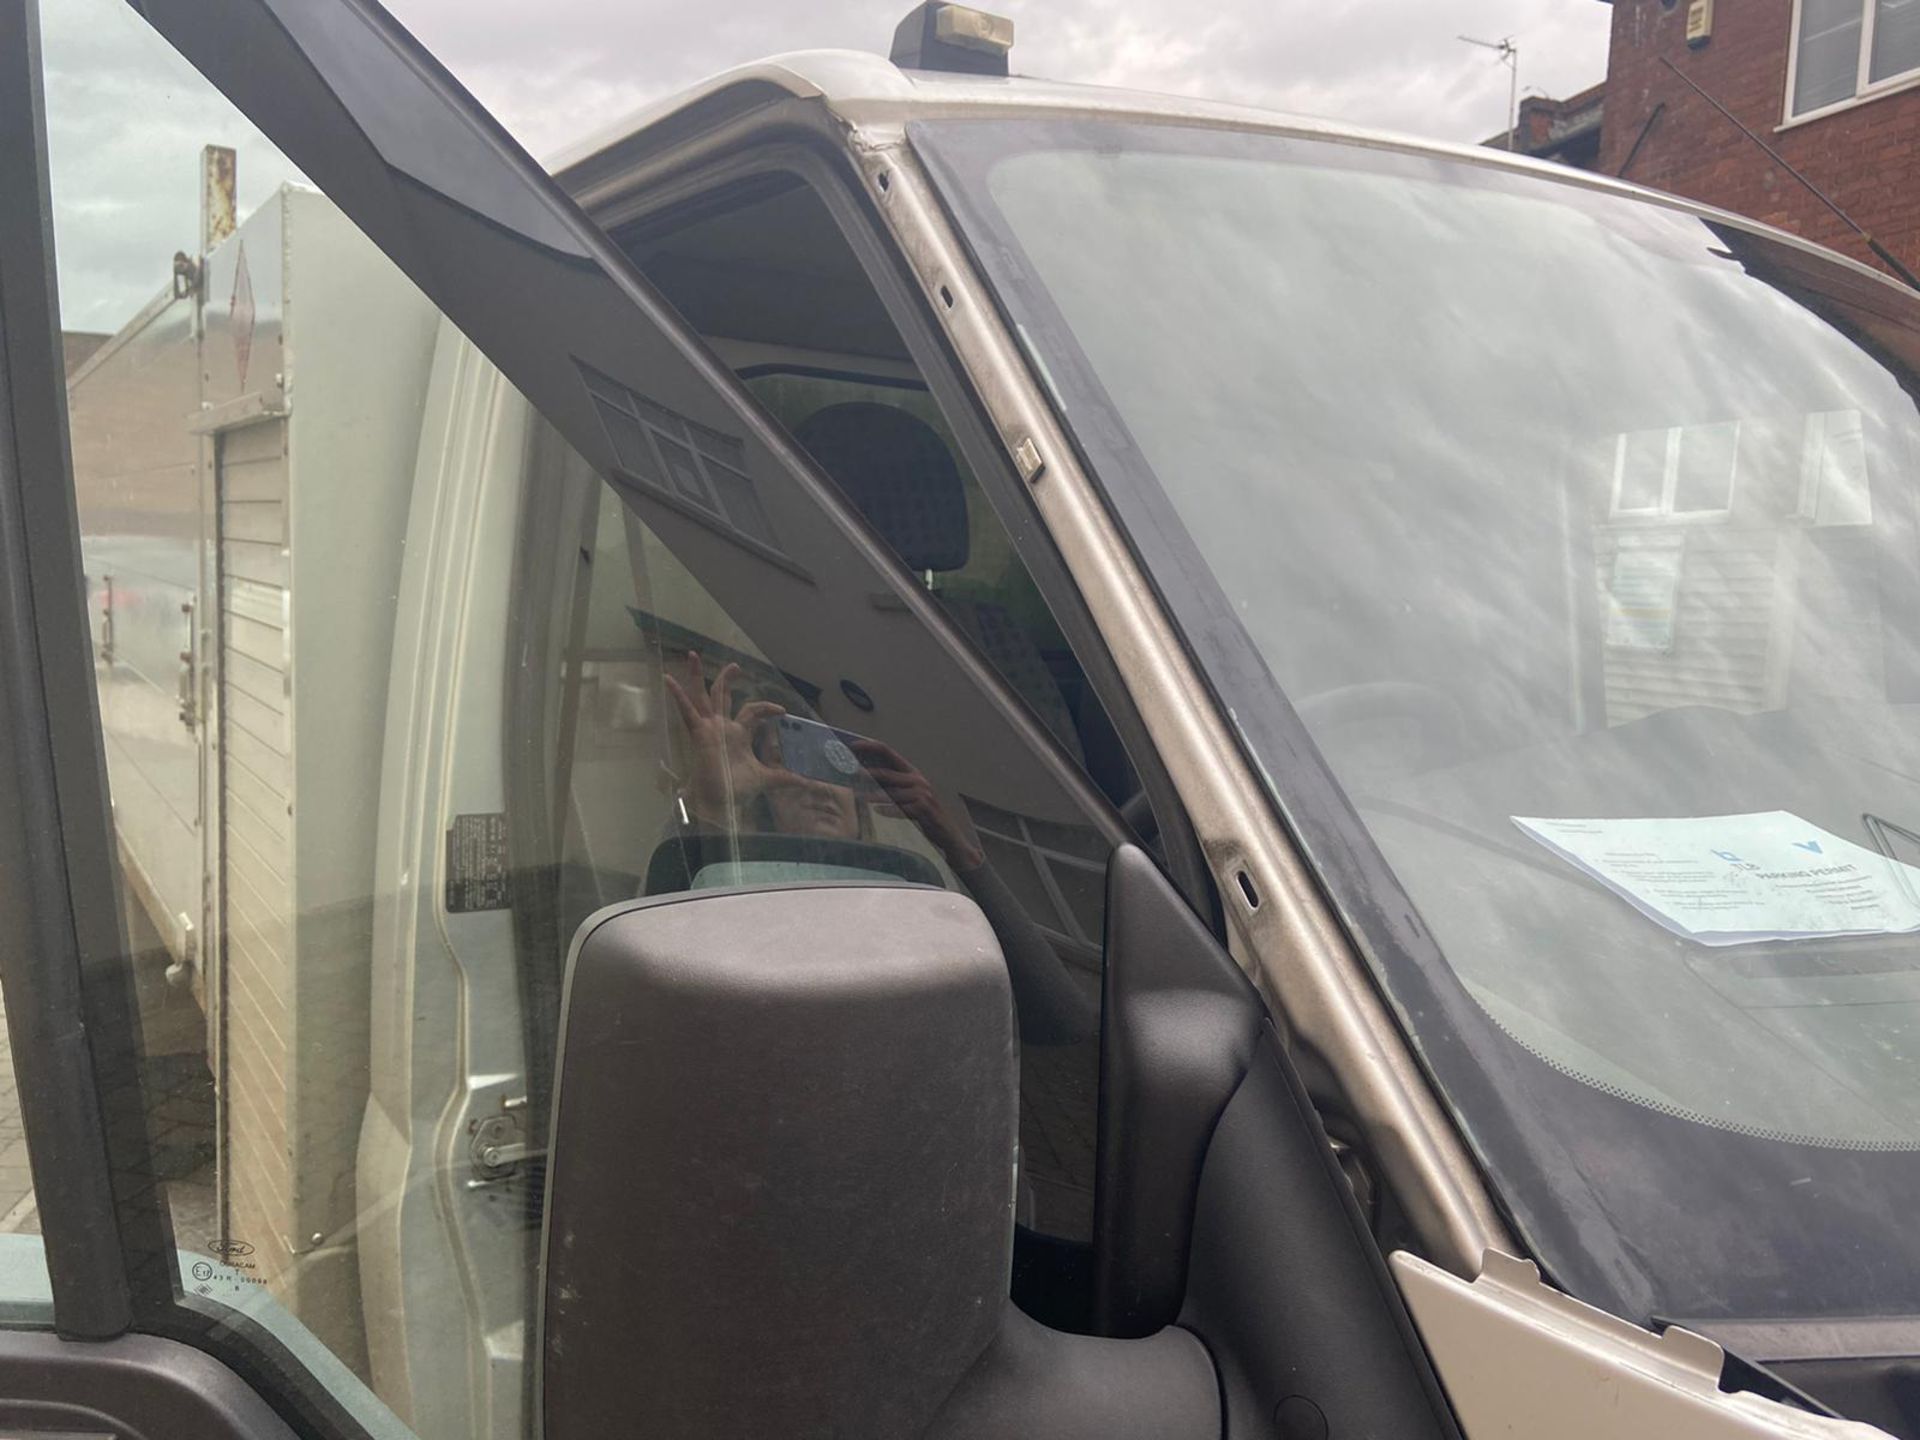 ENTRY DIRECT FROM LOCAL AUTHORITY Ford Transit Tipper - Image 16 of 18